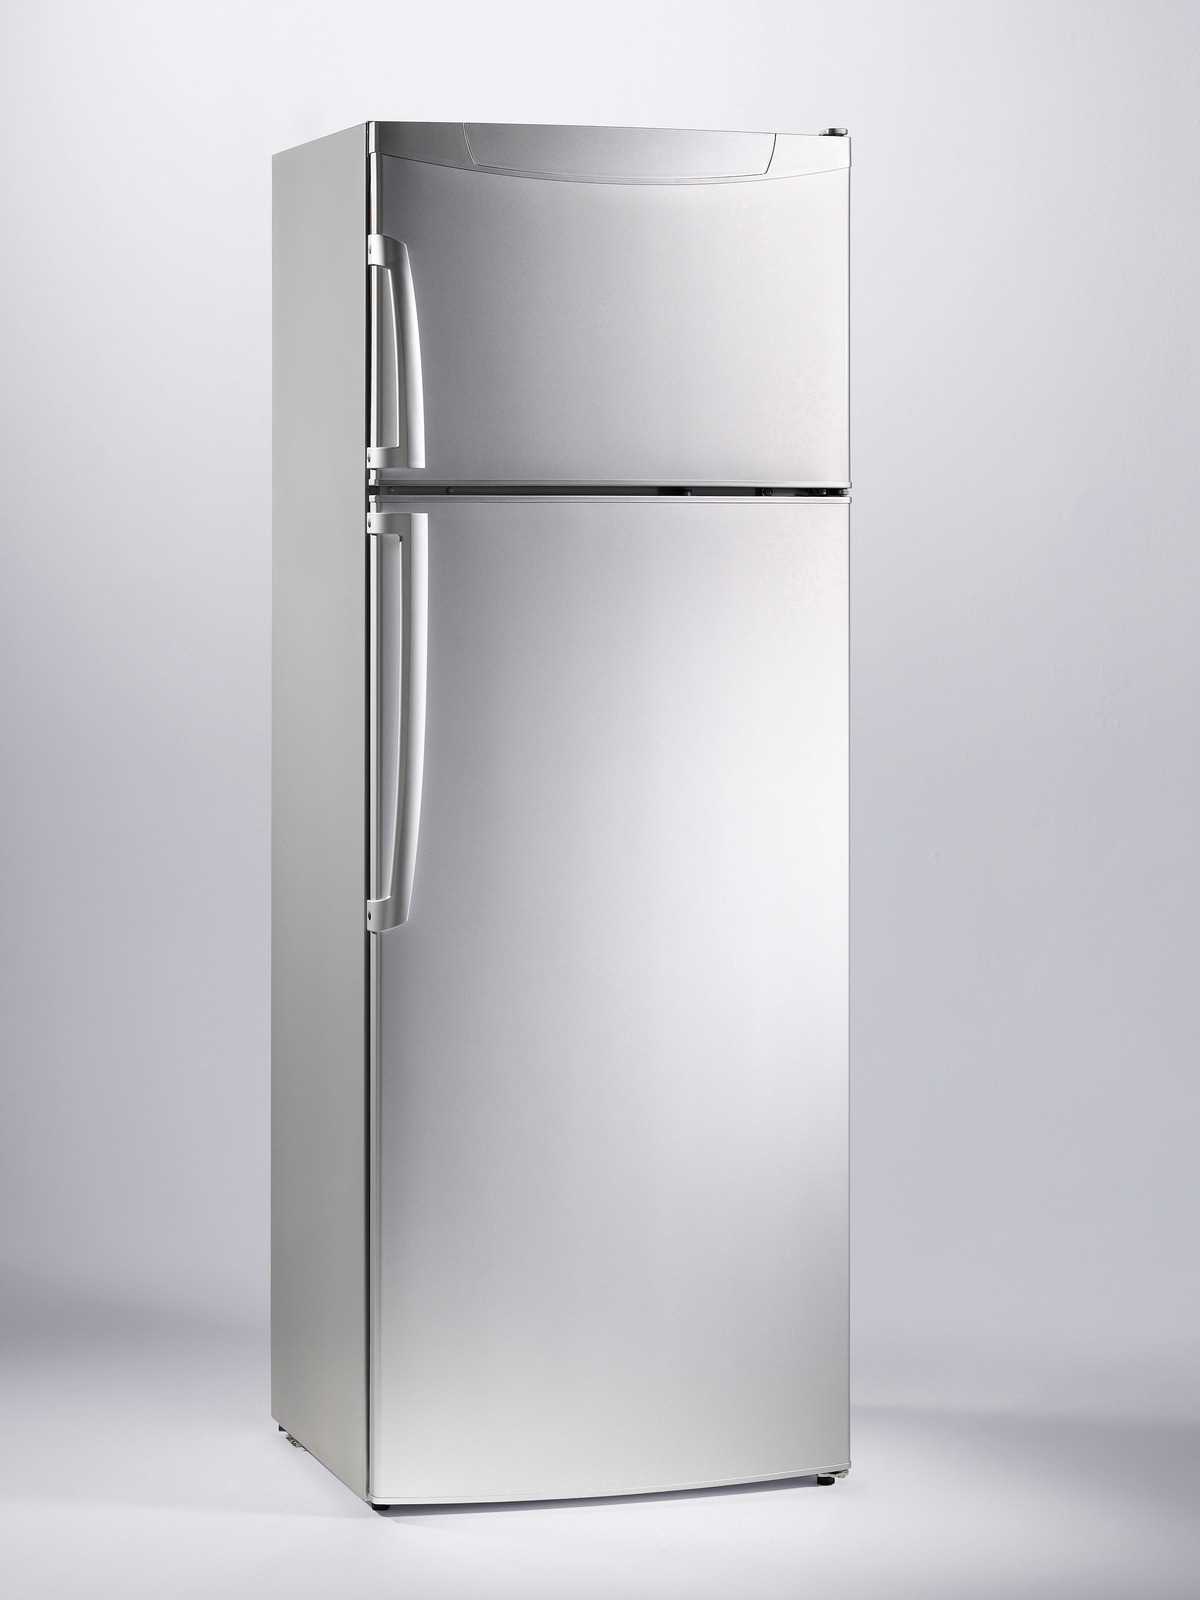 A stainless steel top-freezer refrigerator